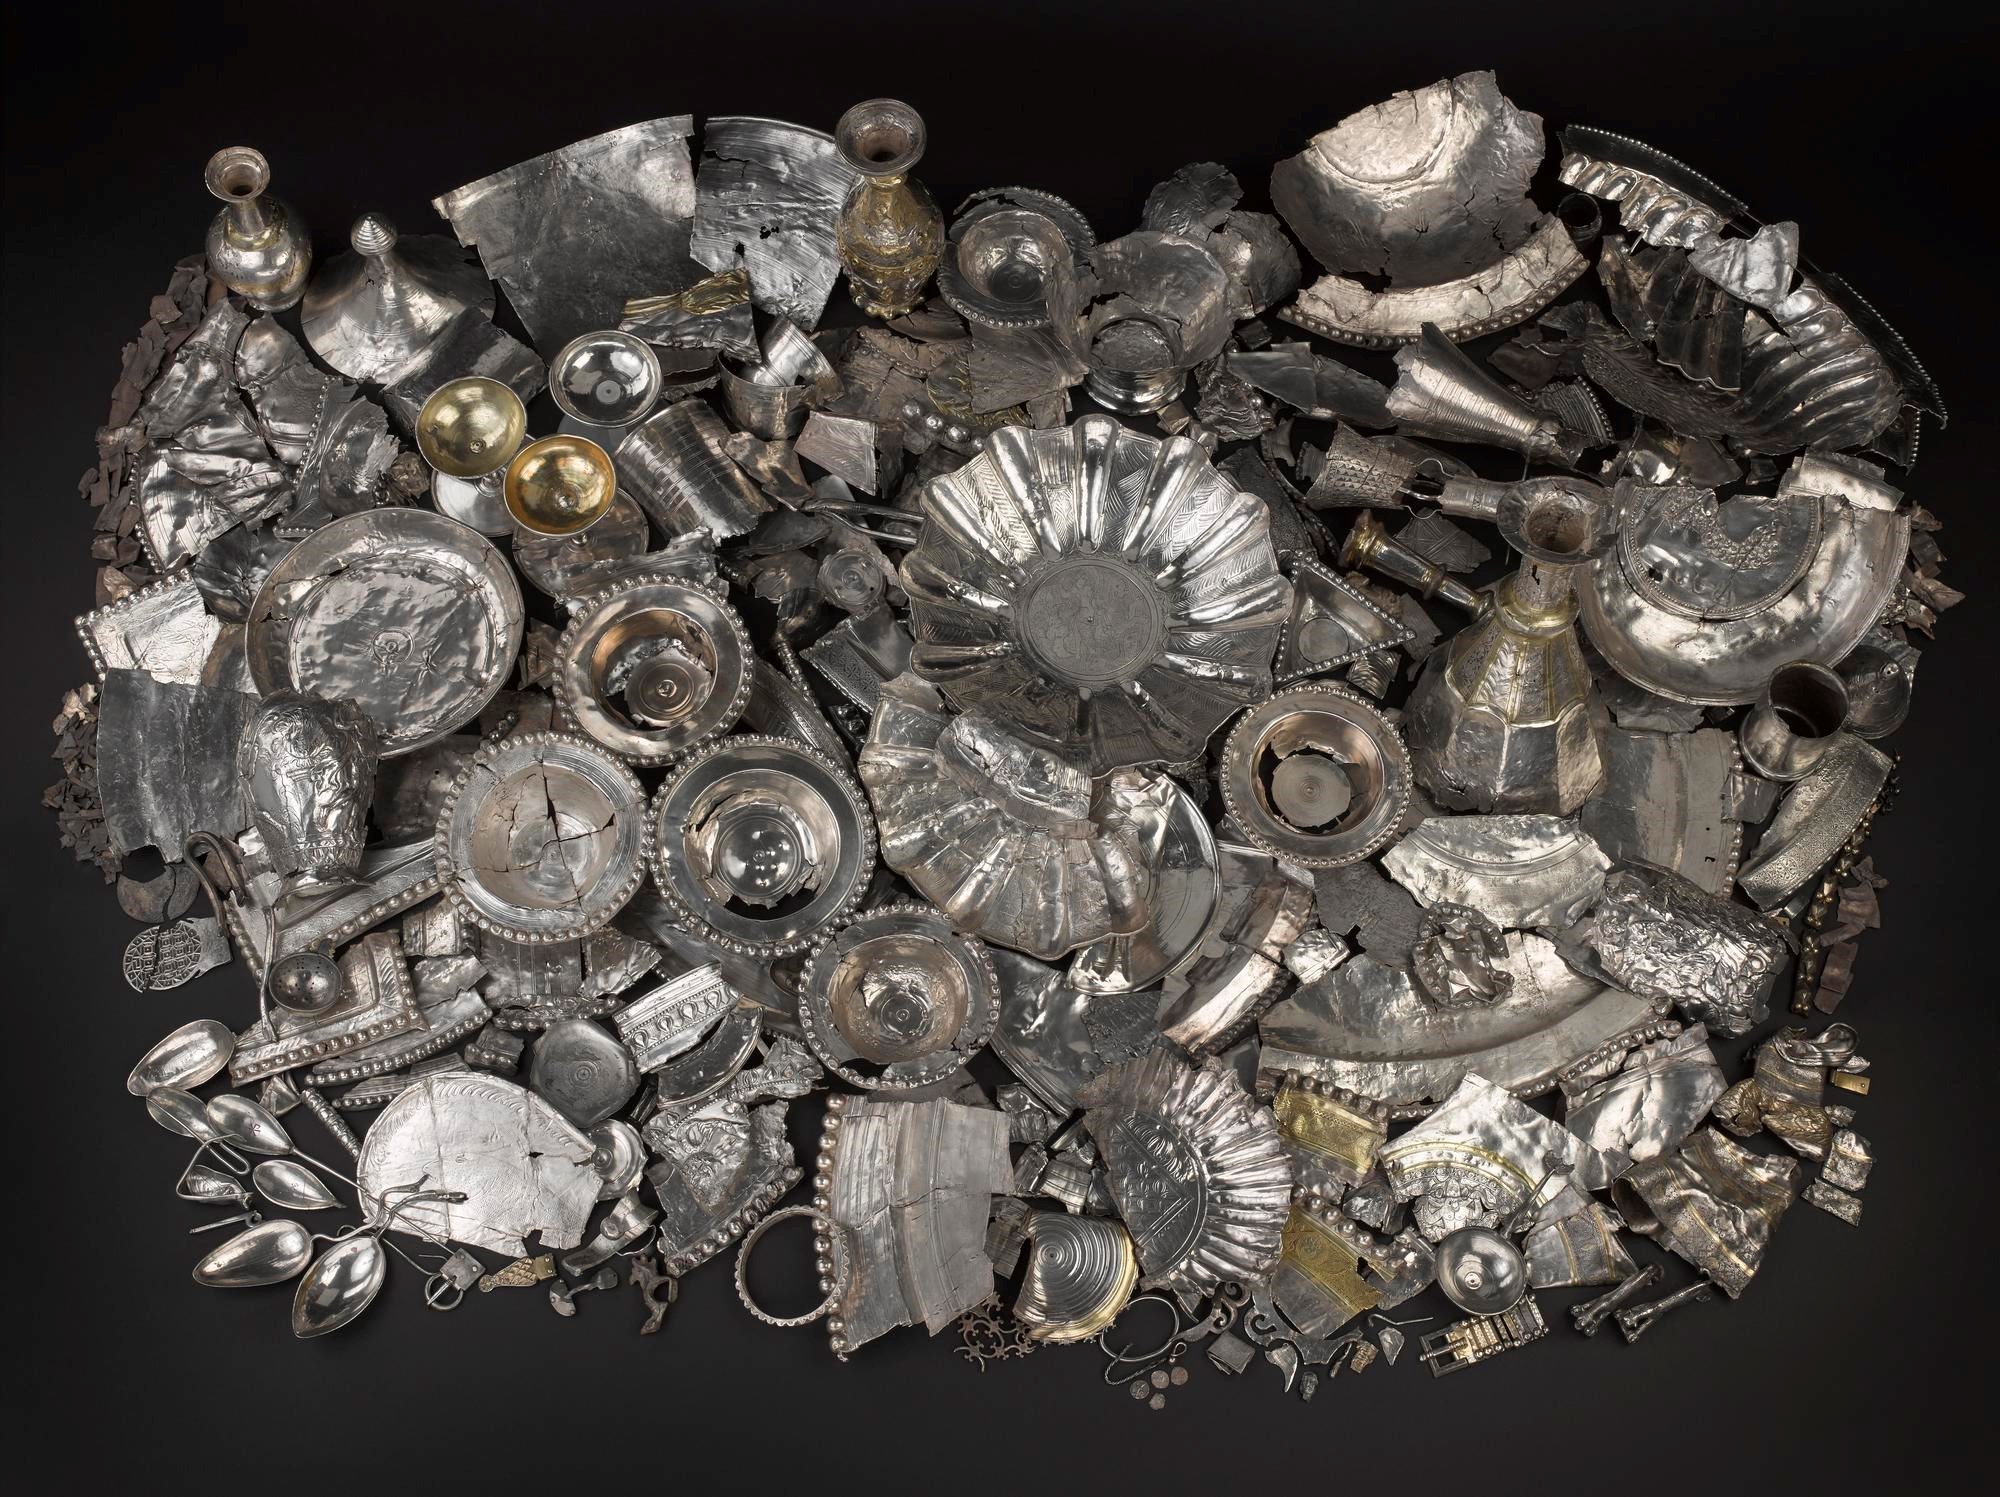 A huge pile of silver objects on a black background, from plates and vessels to tiny fragments and a large bowl in the centre.